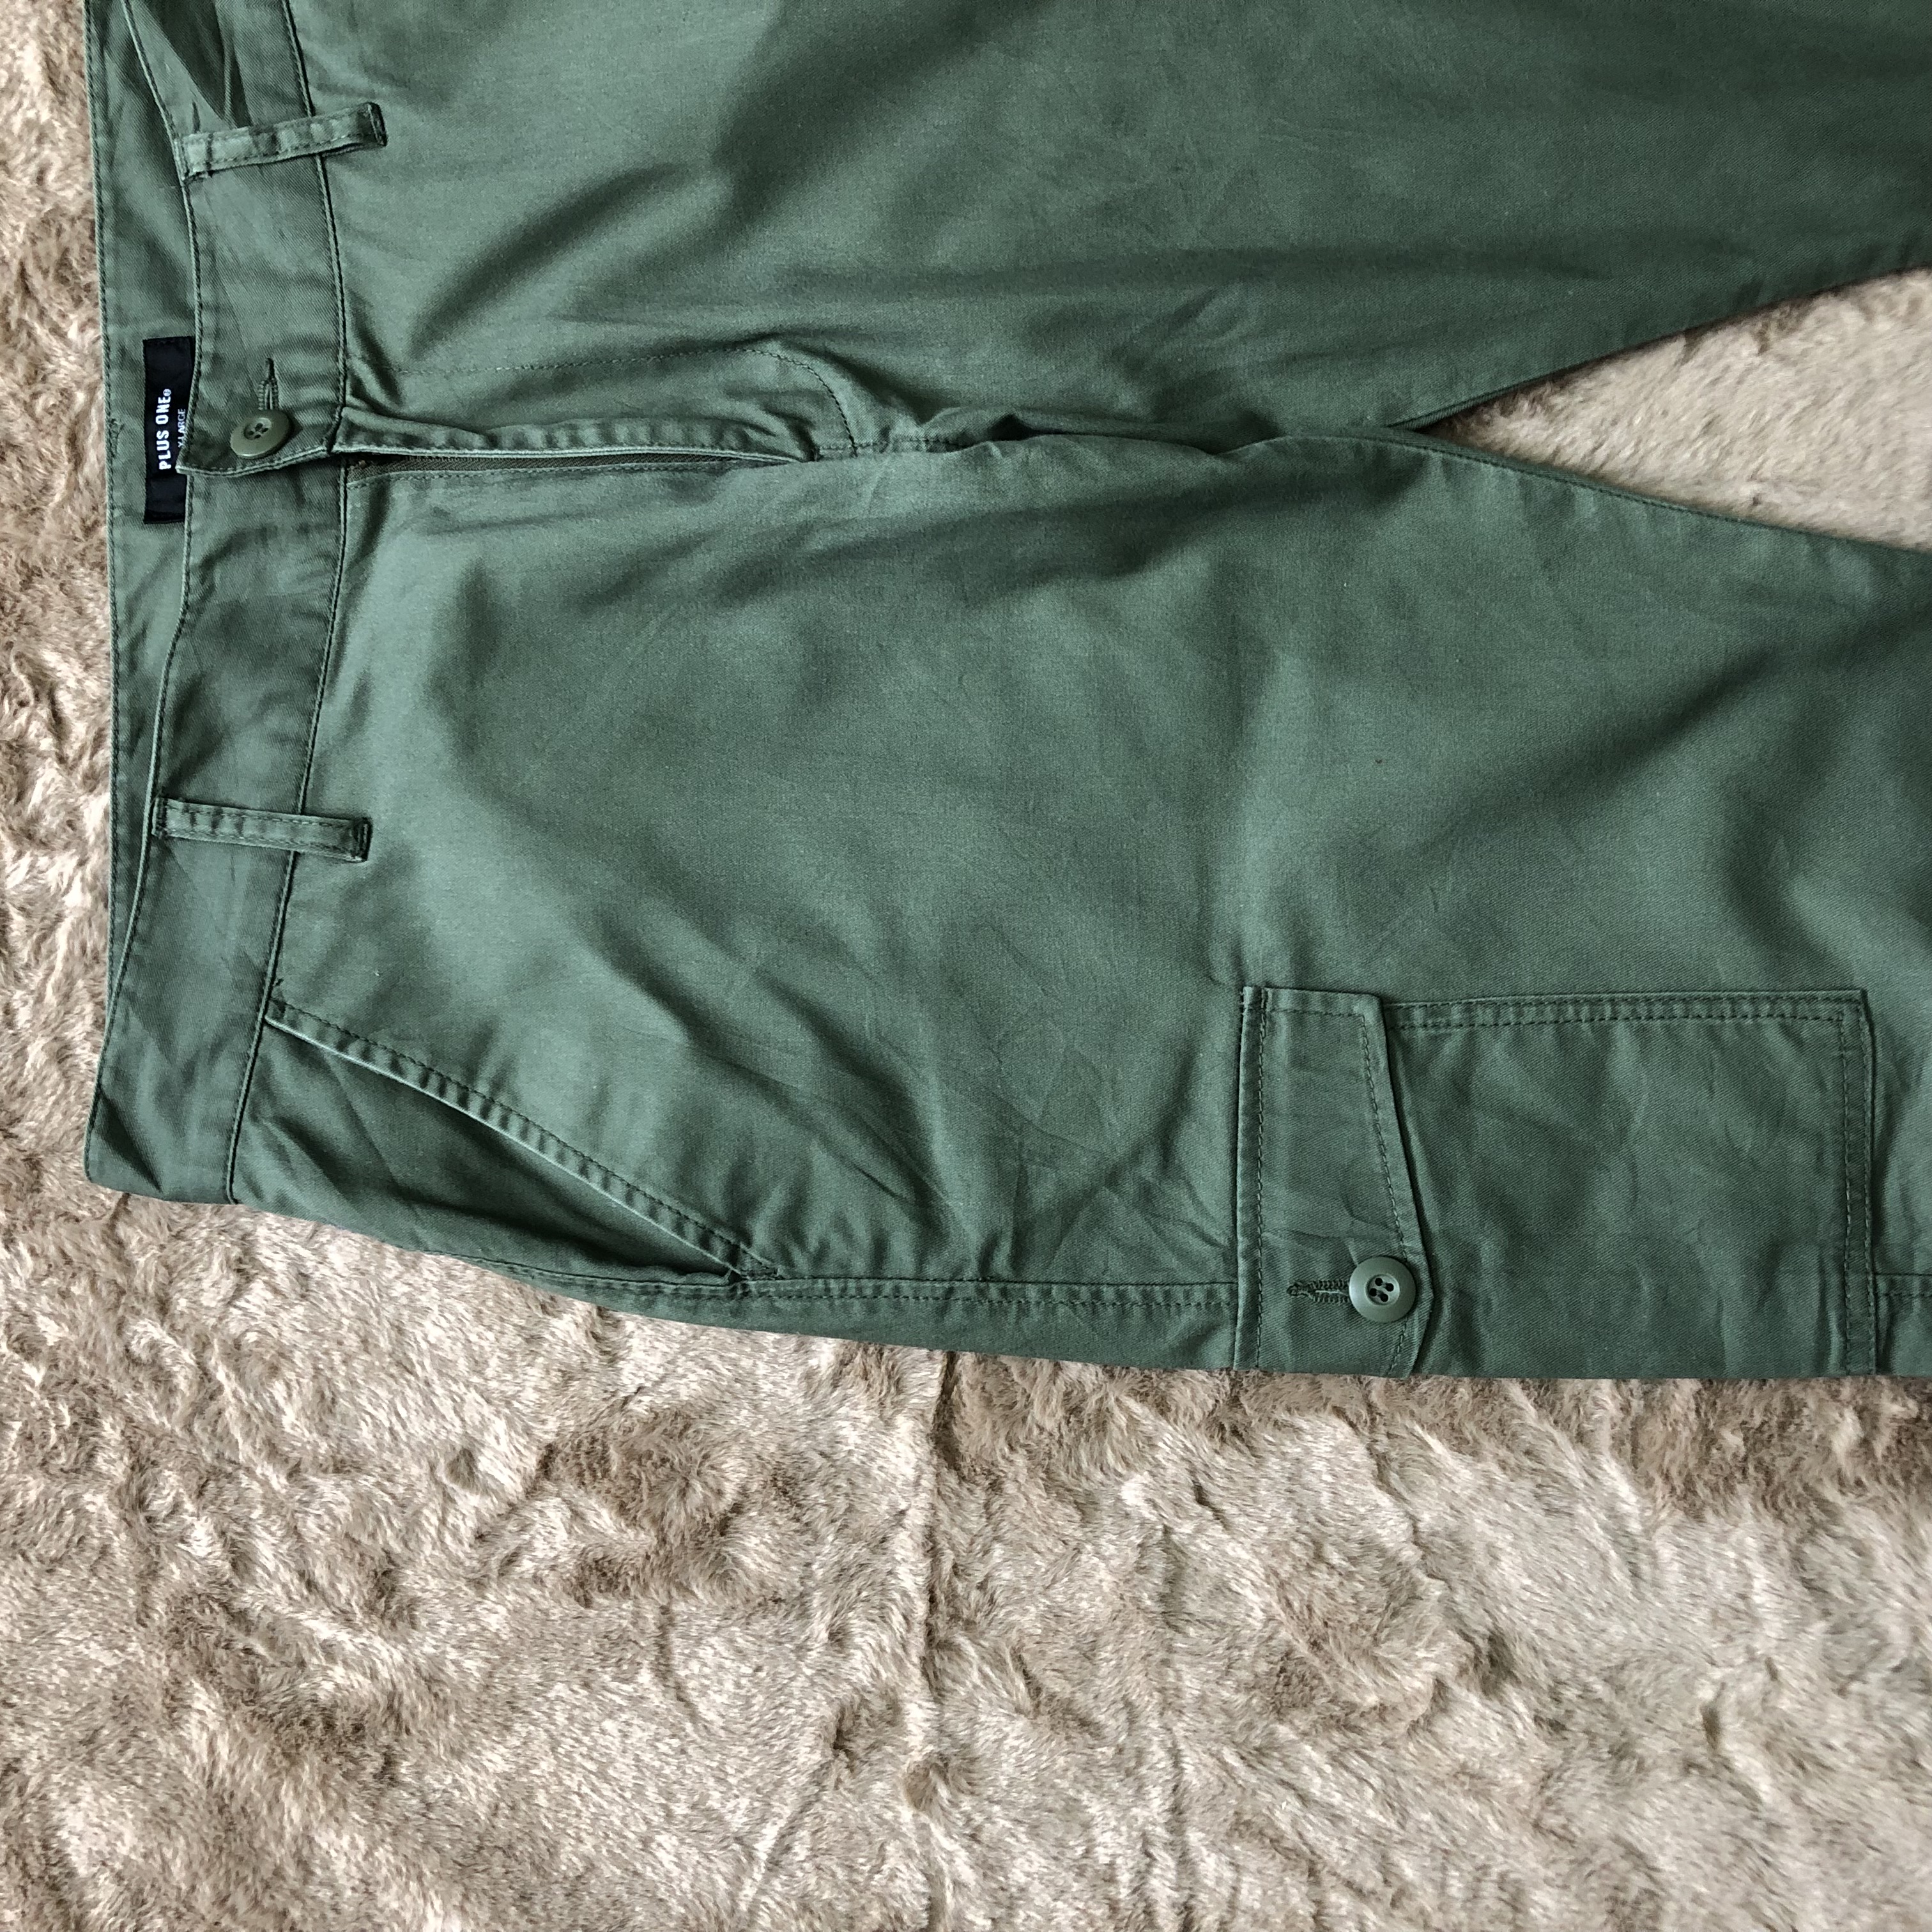 Japanese Brand - Plus One Military Army Style Cargo Pants 6 Pocket #4289-149 - 3